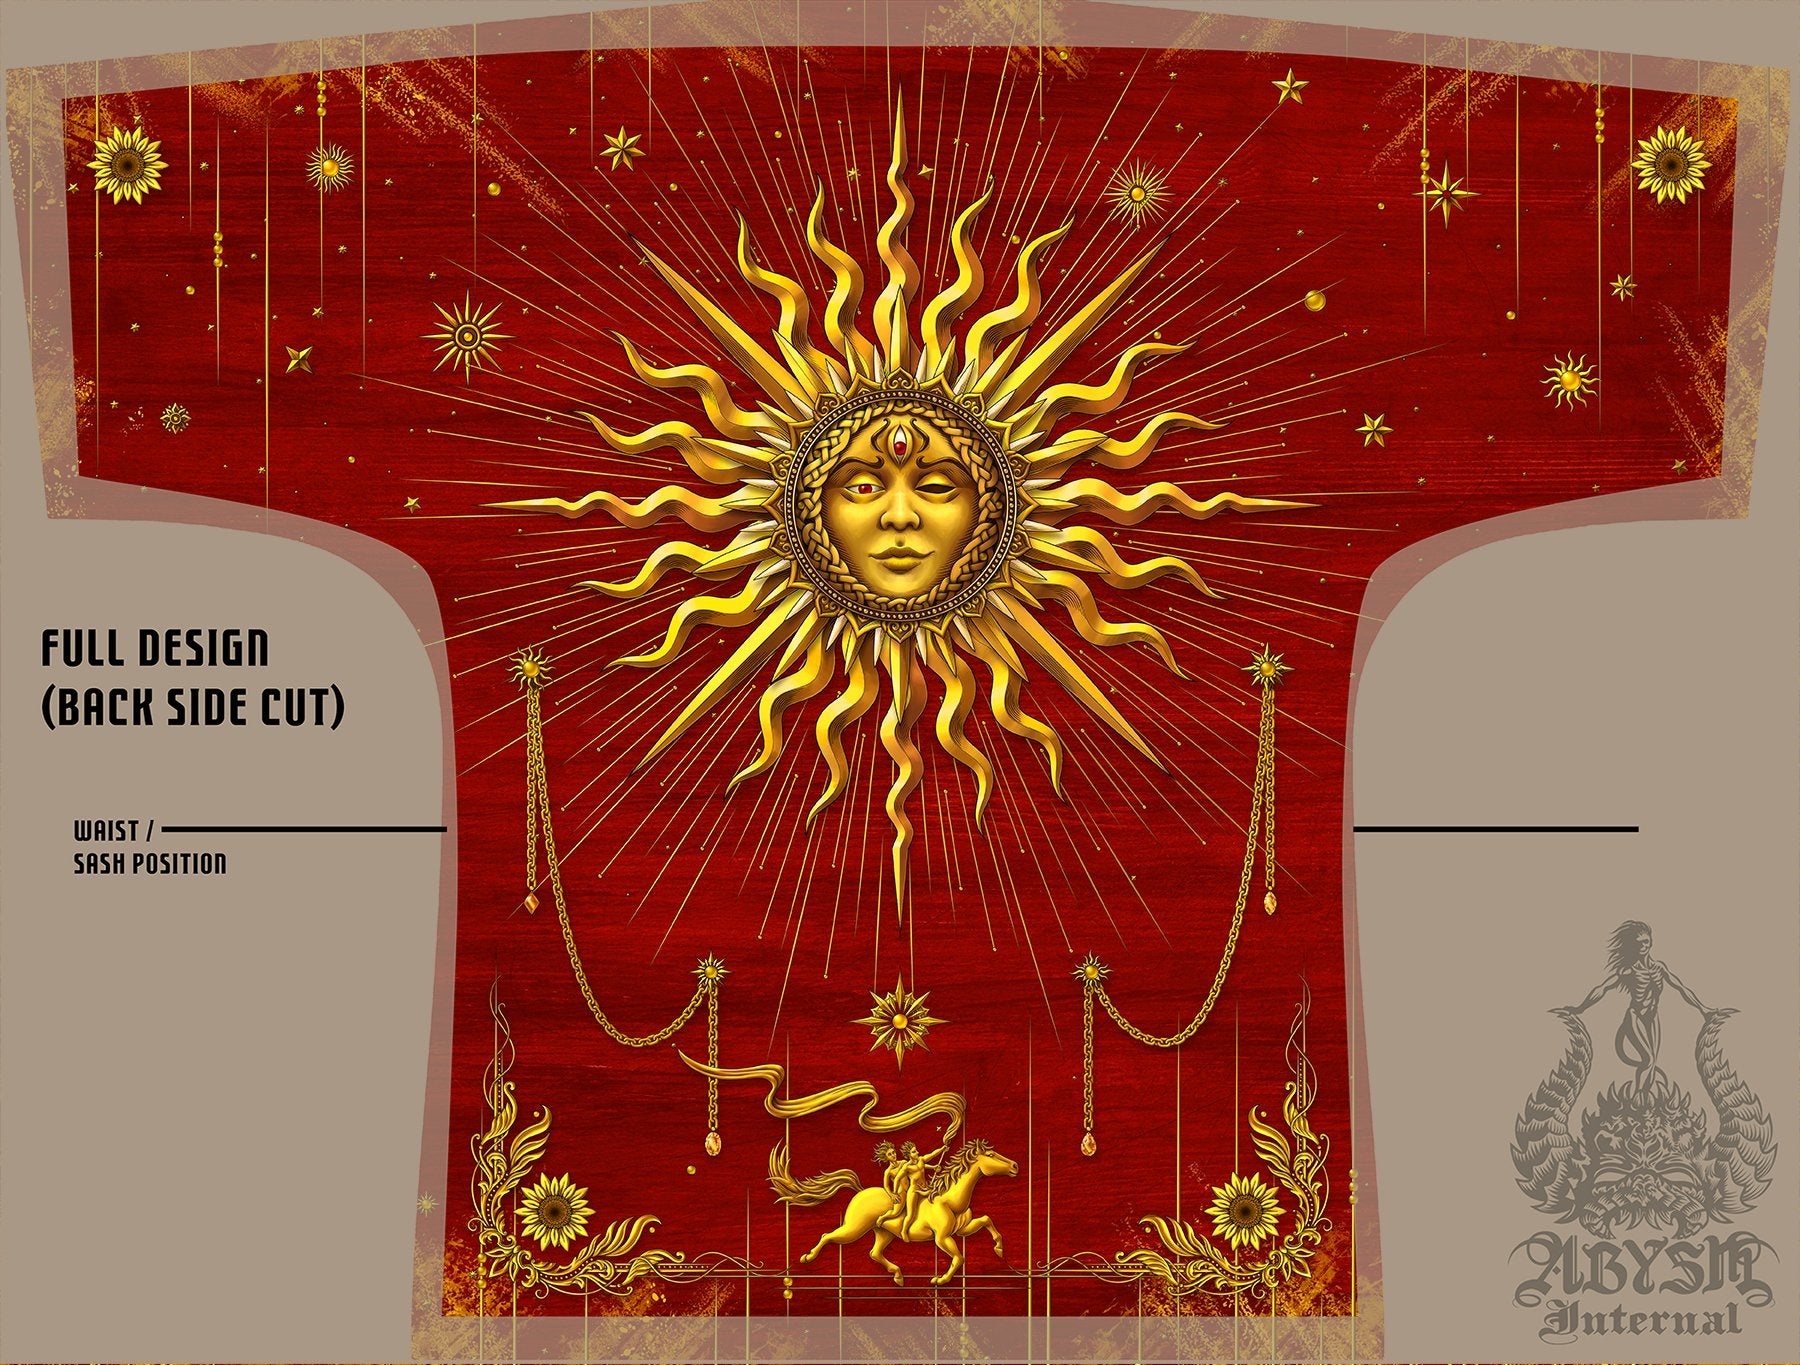 Gold Sun Short Kimono Robe, Indie Beach Party Outfit, Tarot Arcana Coverup, Hippie Summer Festival, Colorful Boho Clothing, Unisex - 7 Colors - Abysm Internal